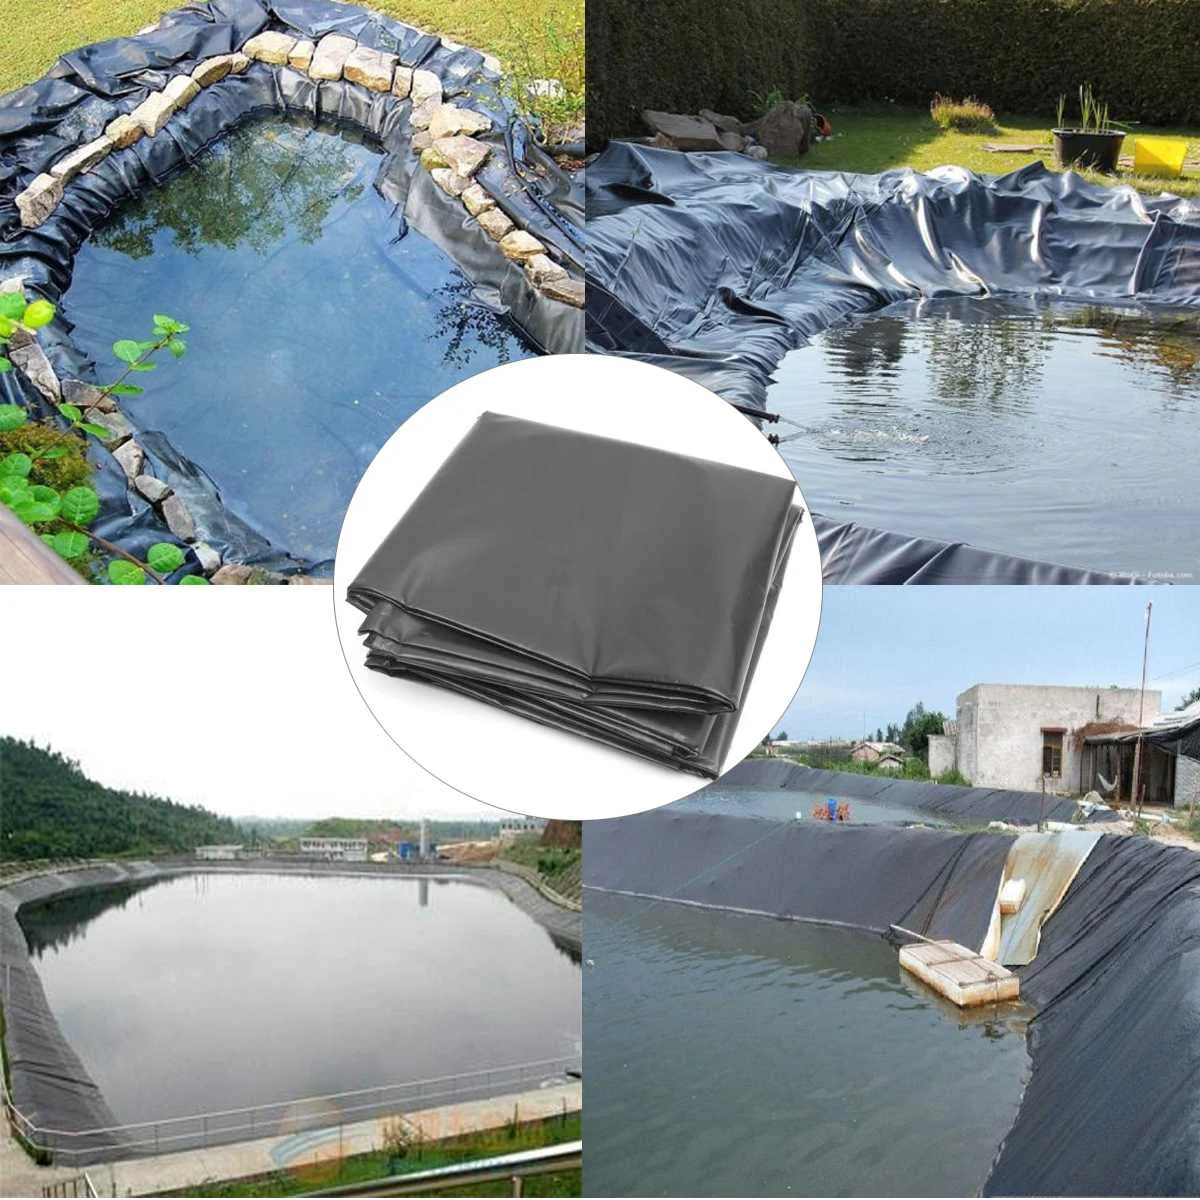 

HDPE Fish Pond Liner Rubber Waterproof Membrane 6x8m / 6x7m / 6x6m / 6x5m / 6x4m Garden Pond Landscaping Pool Thick Liner Cloth